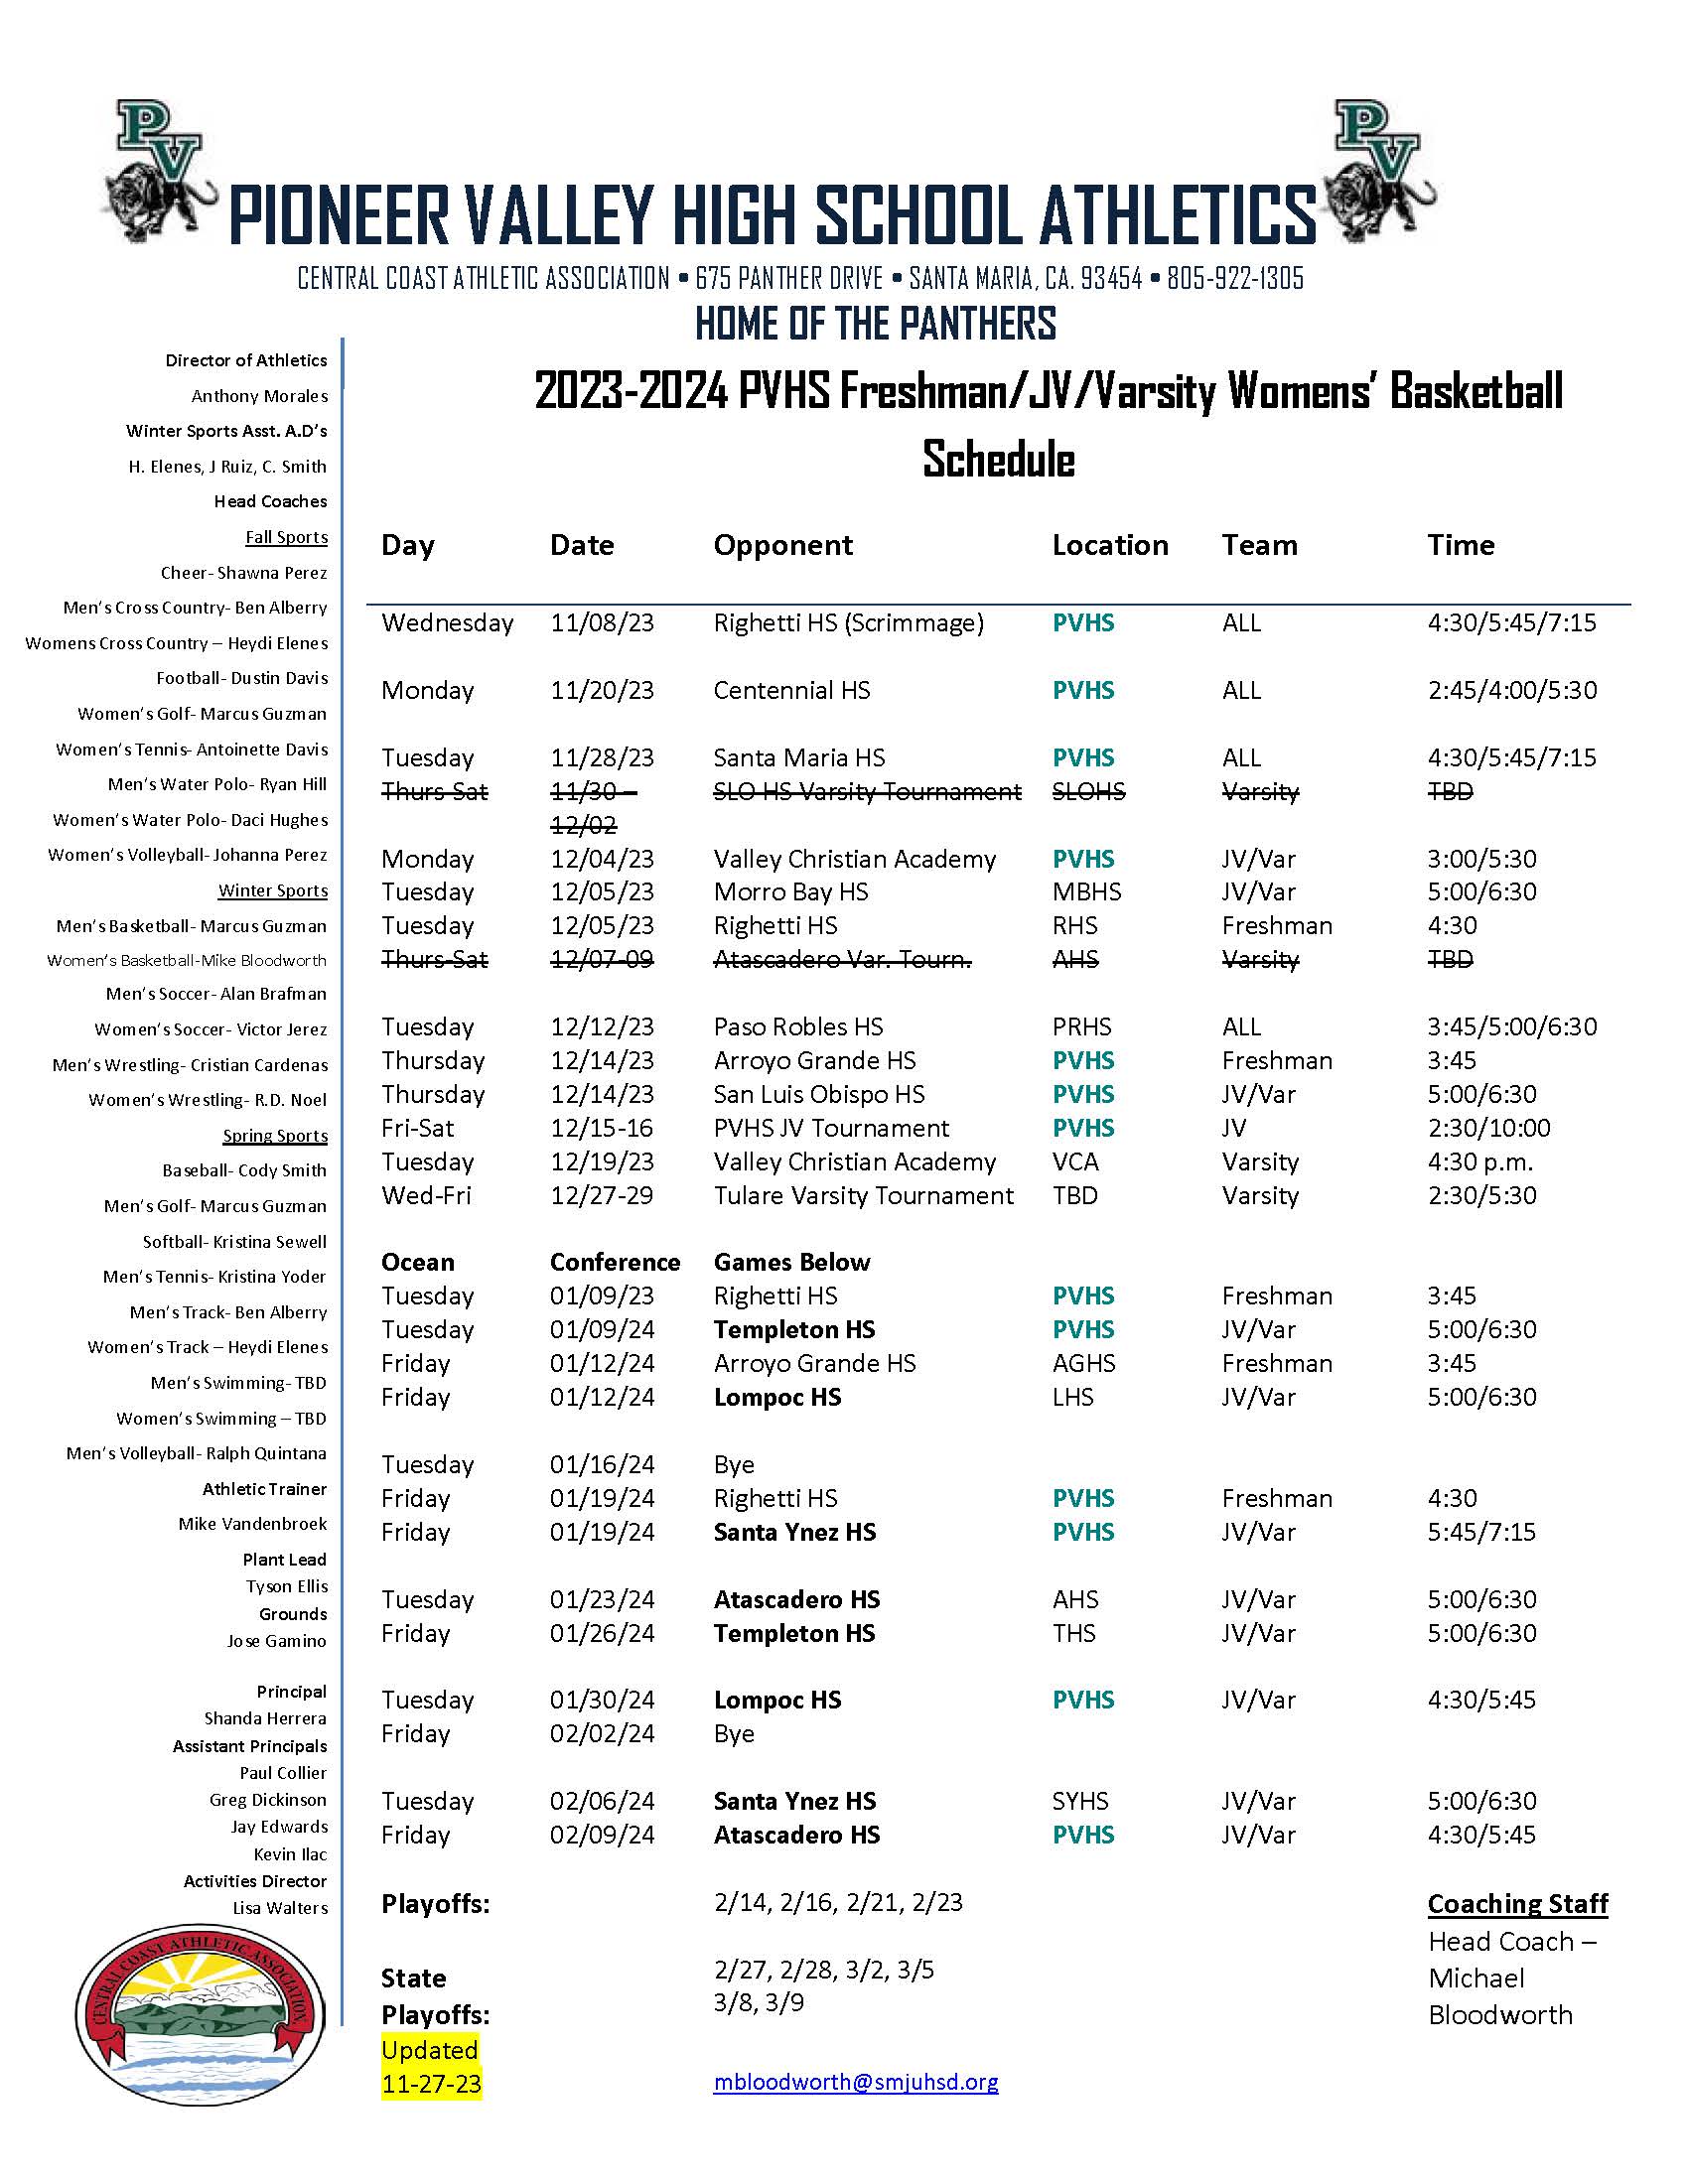 Womens Basketball Sched ver 2